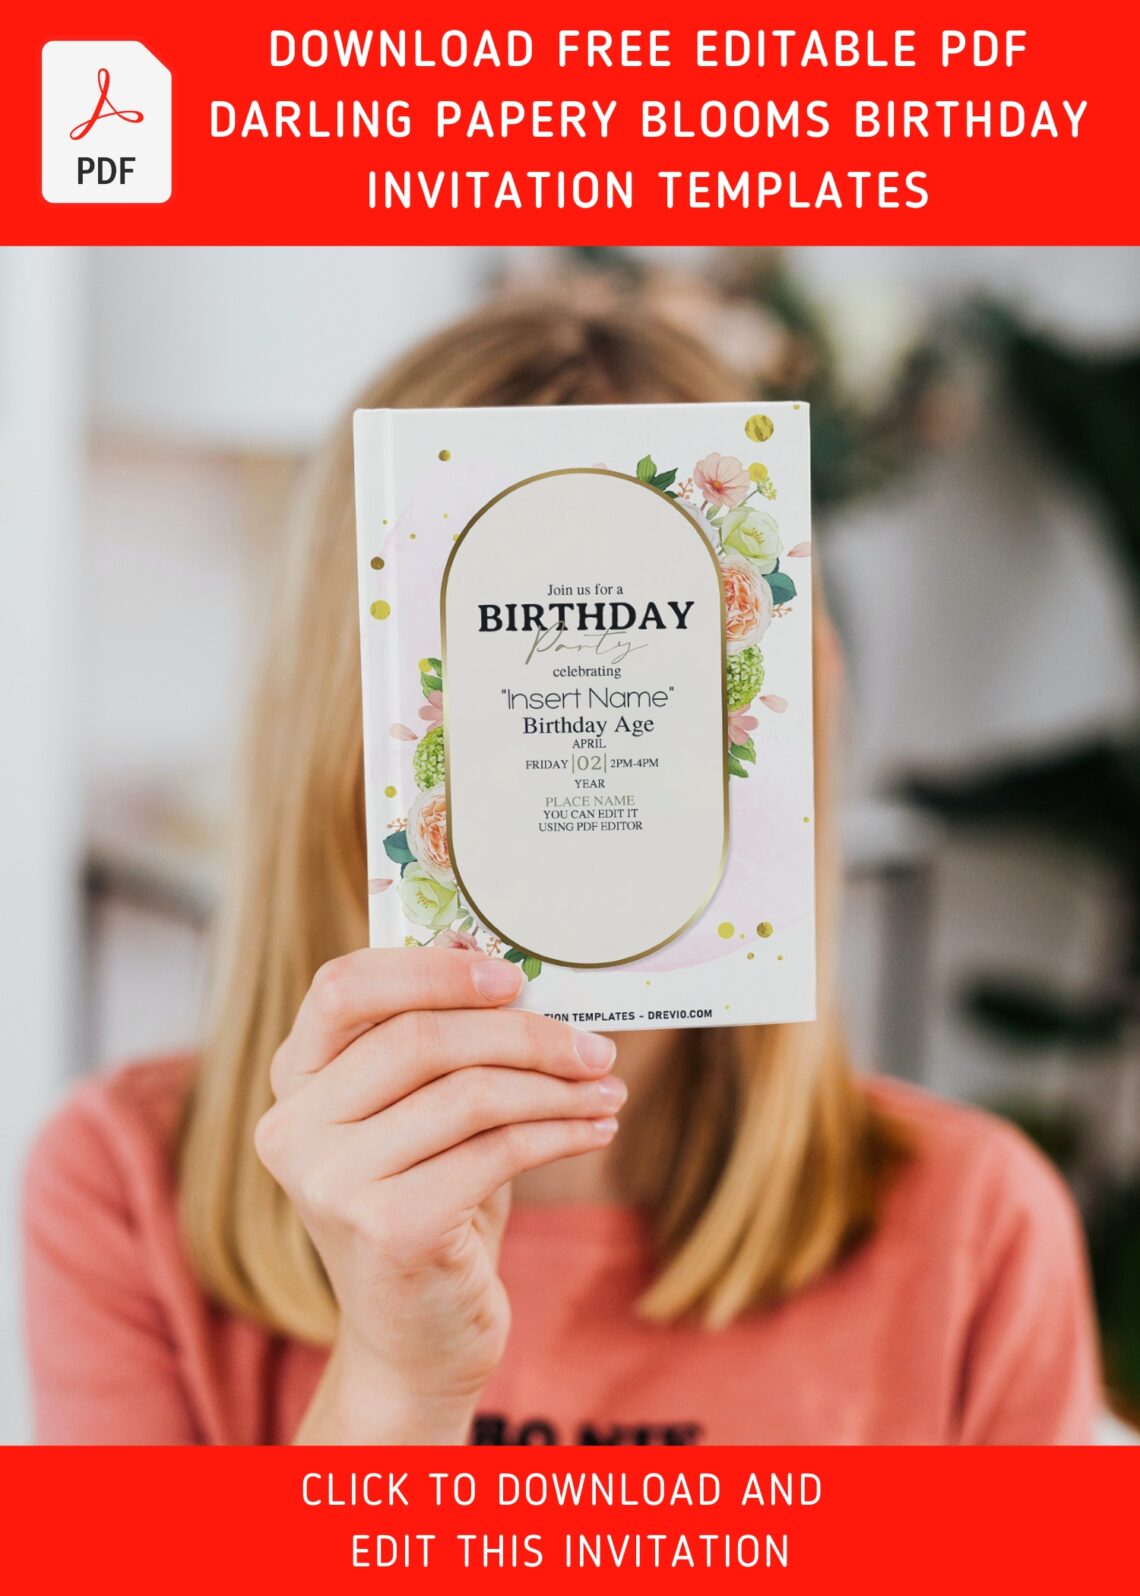 (Free Editable PDF) Darling Papery Blooms Birthday Invitation Templates with